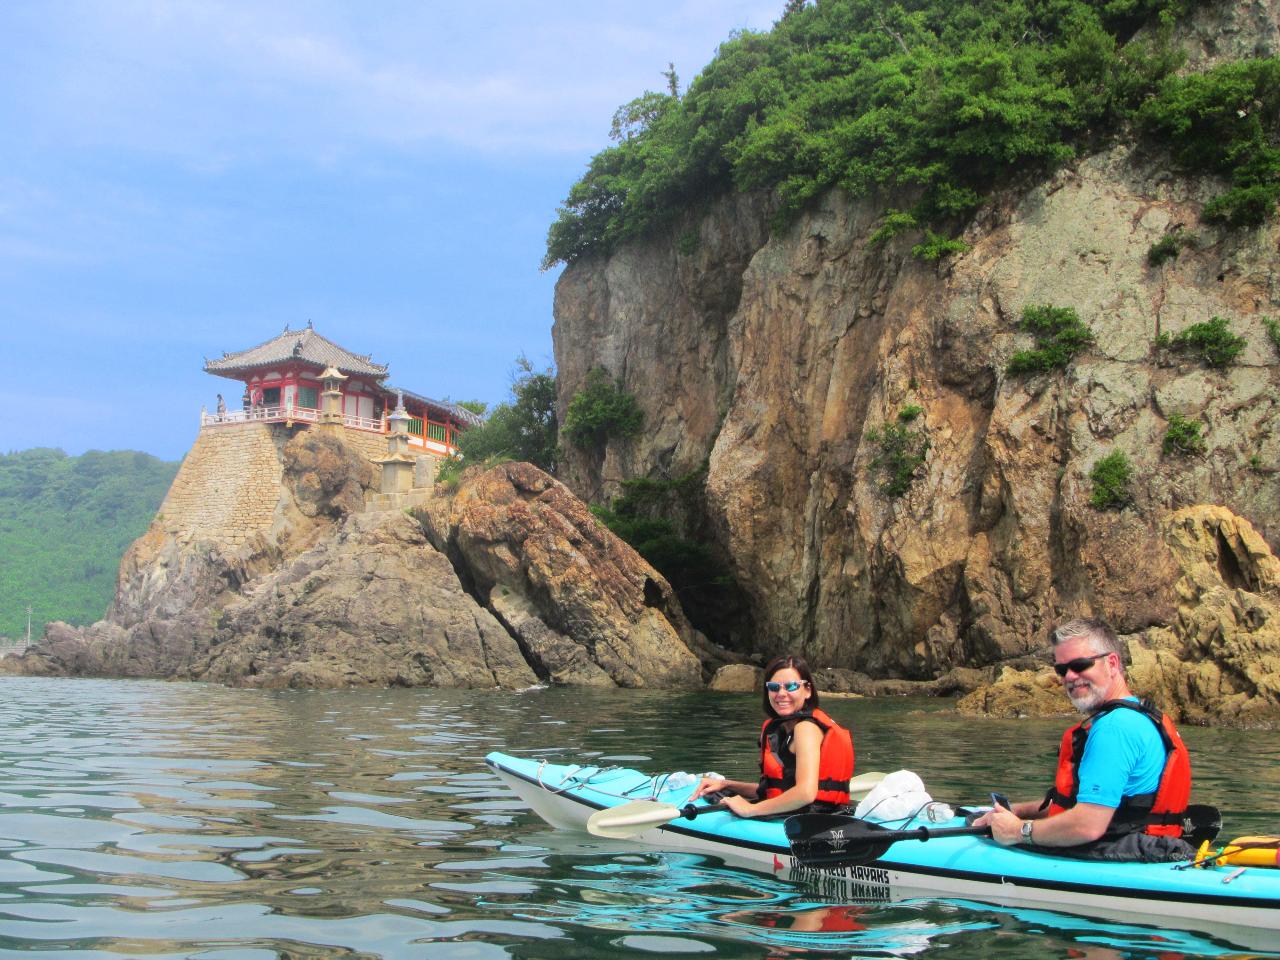 Explore the Nature that Inspired Ghibli Movies on an Exciting Kayak Tour (Half Day)